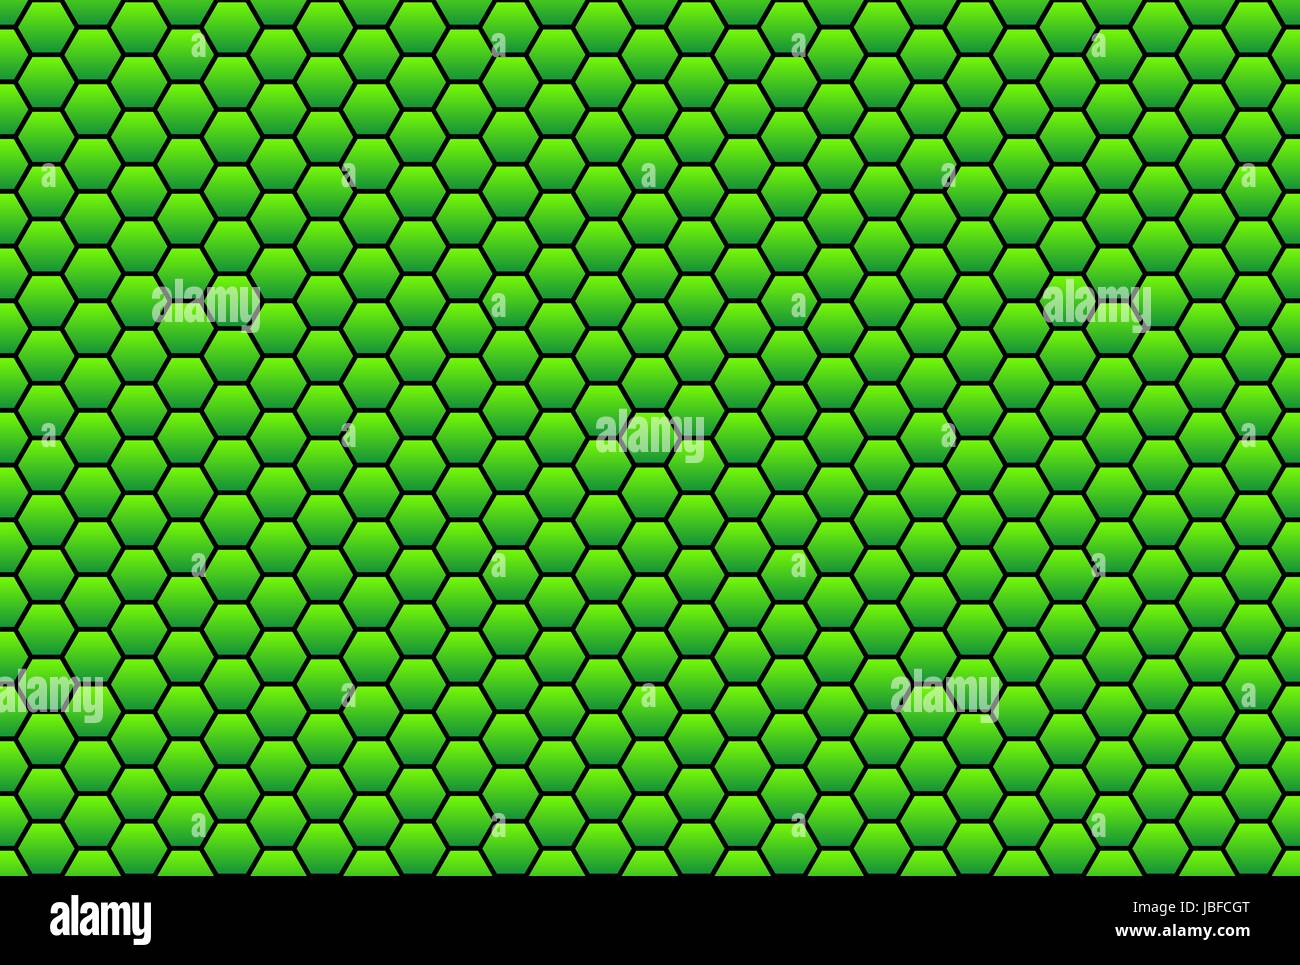 honeycomb pattern in green as background Stock Photo - Alamy